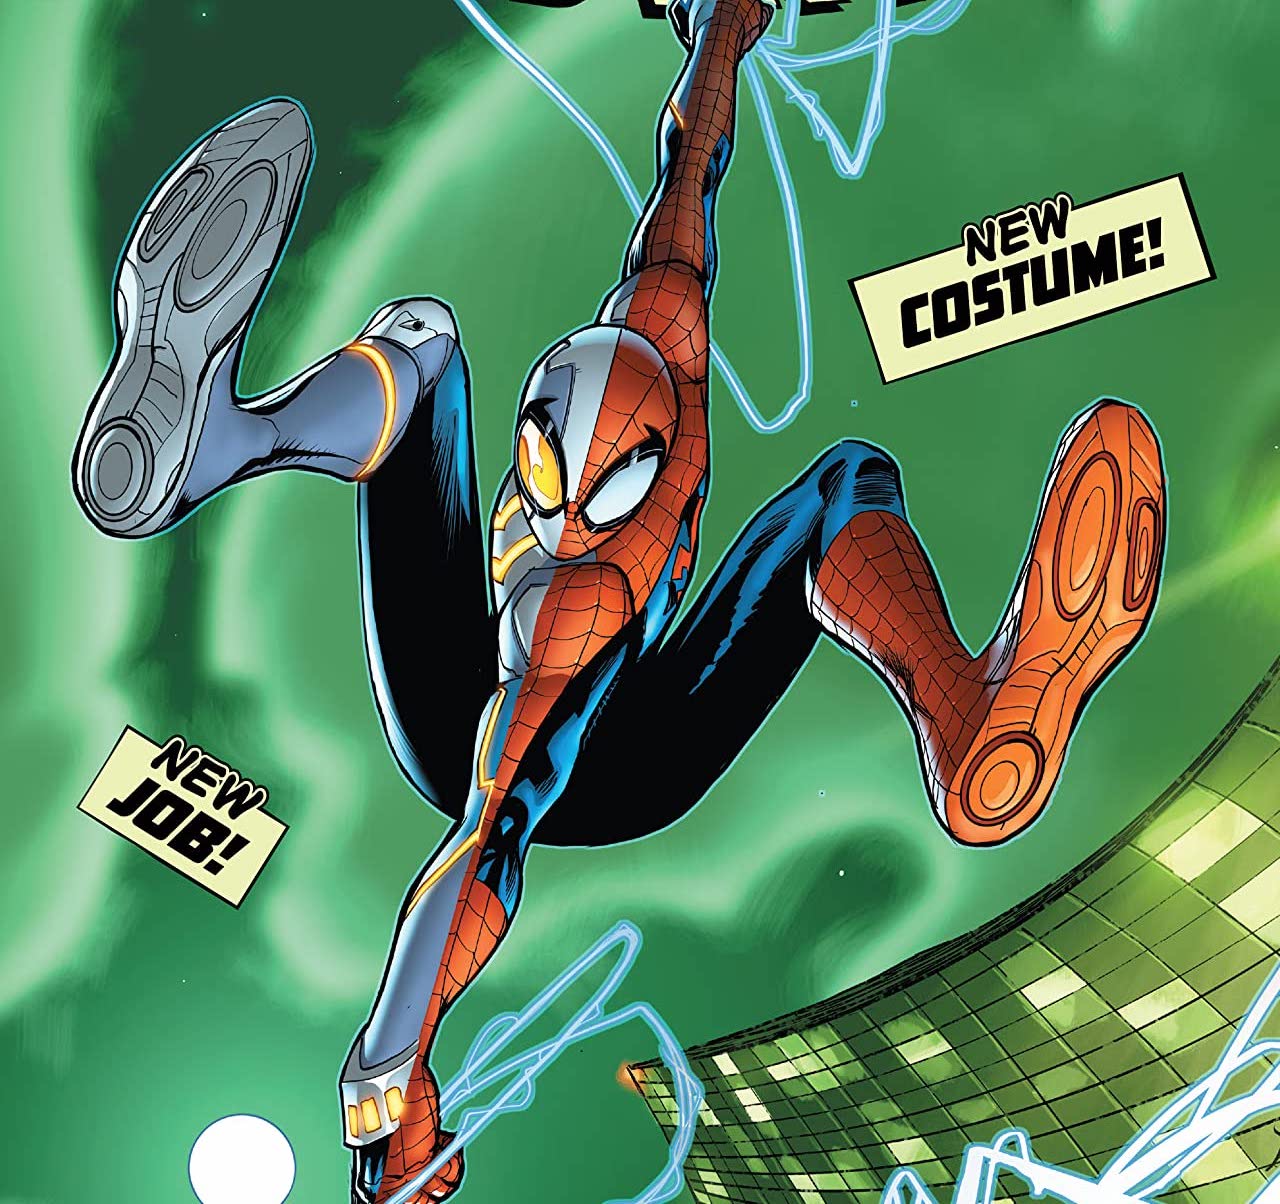 'Amazing Spider-Man' #61 delivers a new job and a new suit